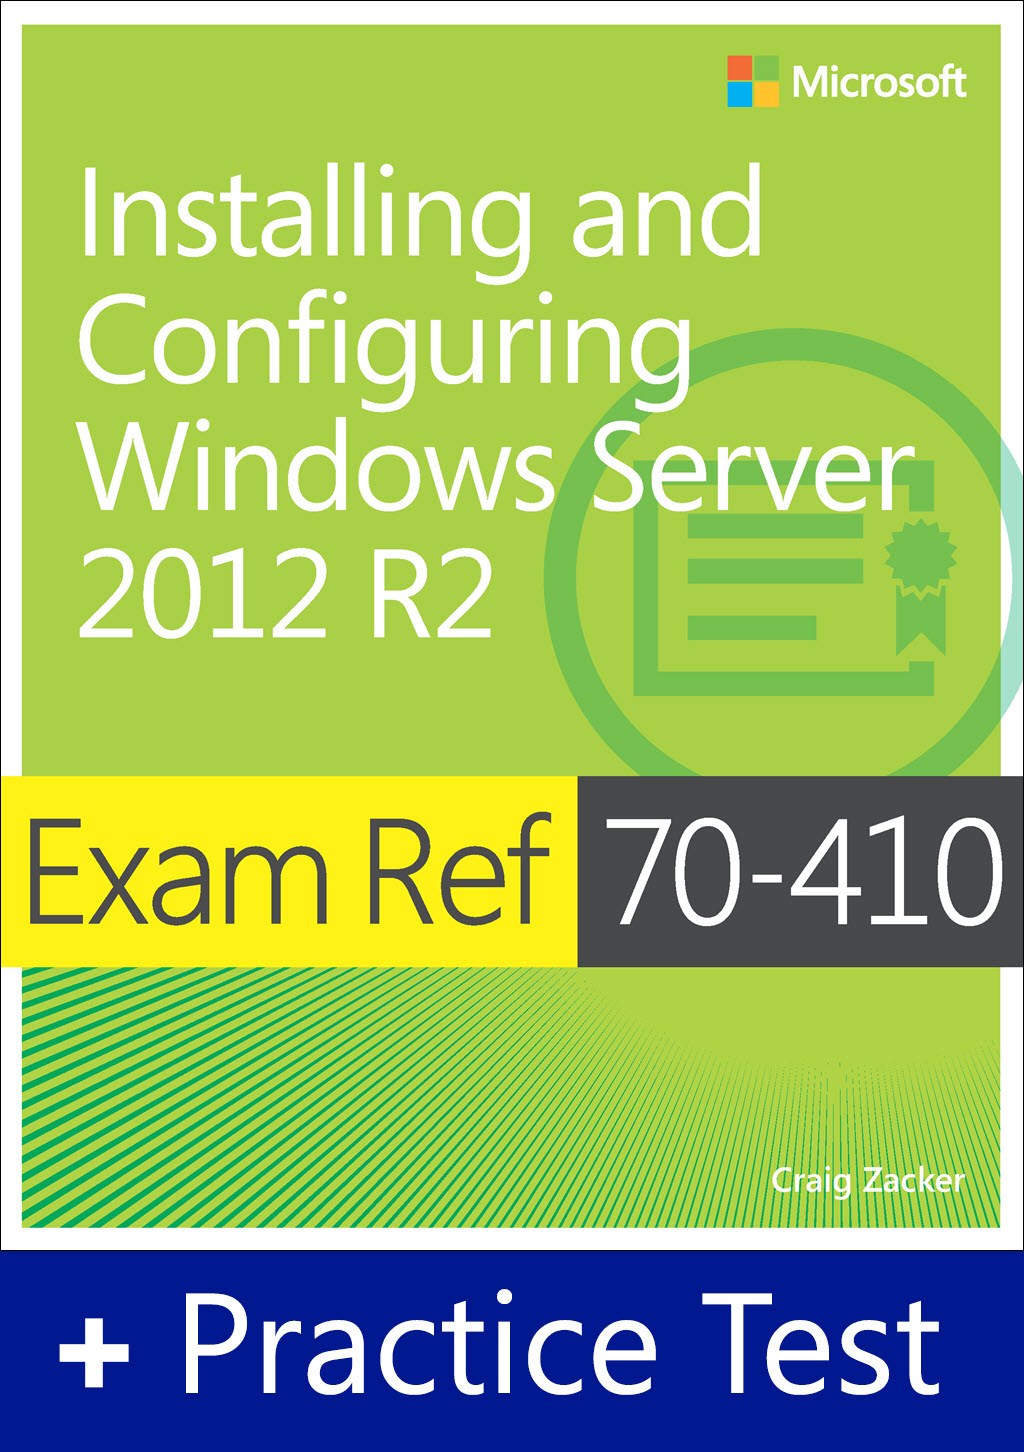 Exam Ref 70-410 Installing and Configuring Windows Server 2012 R2 with Practice Test